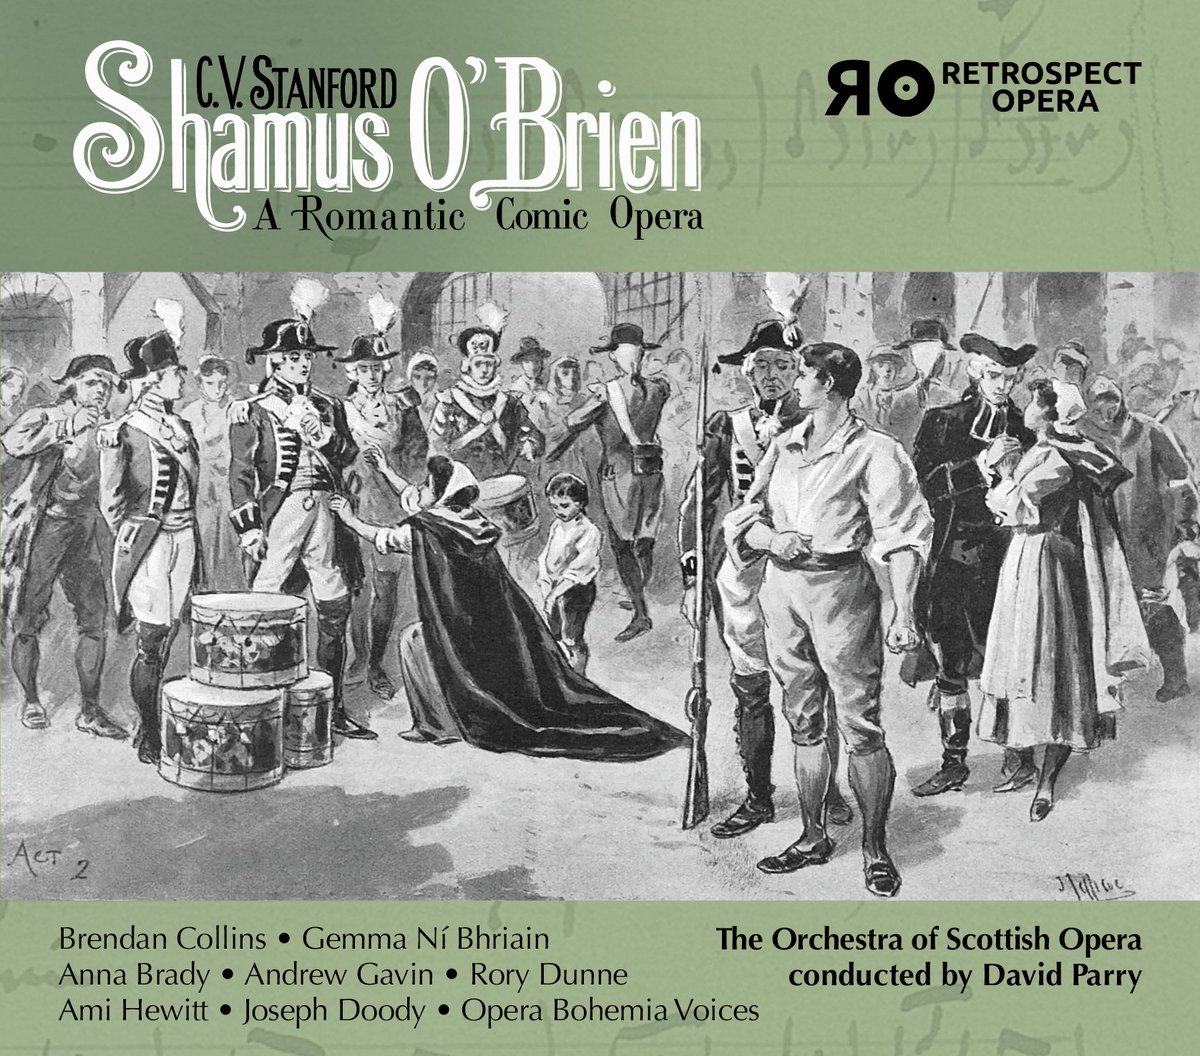 At 7pm #OperaNight @Paullyricfm continues the #Stanford100 Celebrations with his opera Shamus O'Brien Set against the Irish rebellion of 1798 & tells the story of the charismatic Shamus O'Brien, hunted by the English so he can be brought to justice, but will he manage to escape?